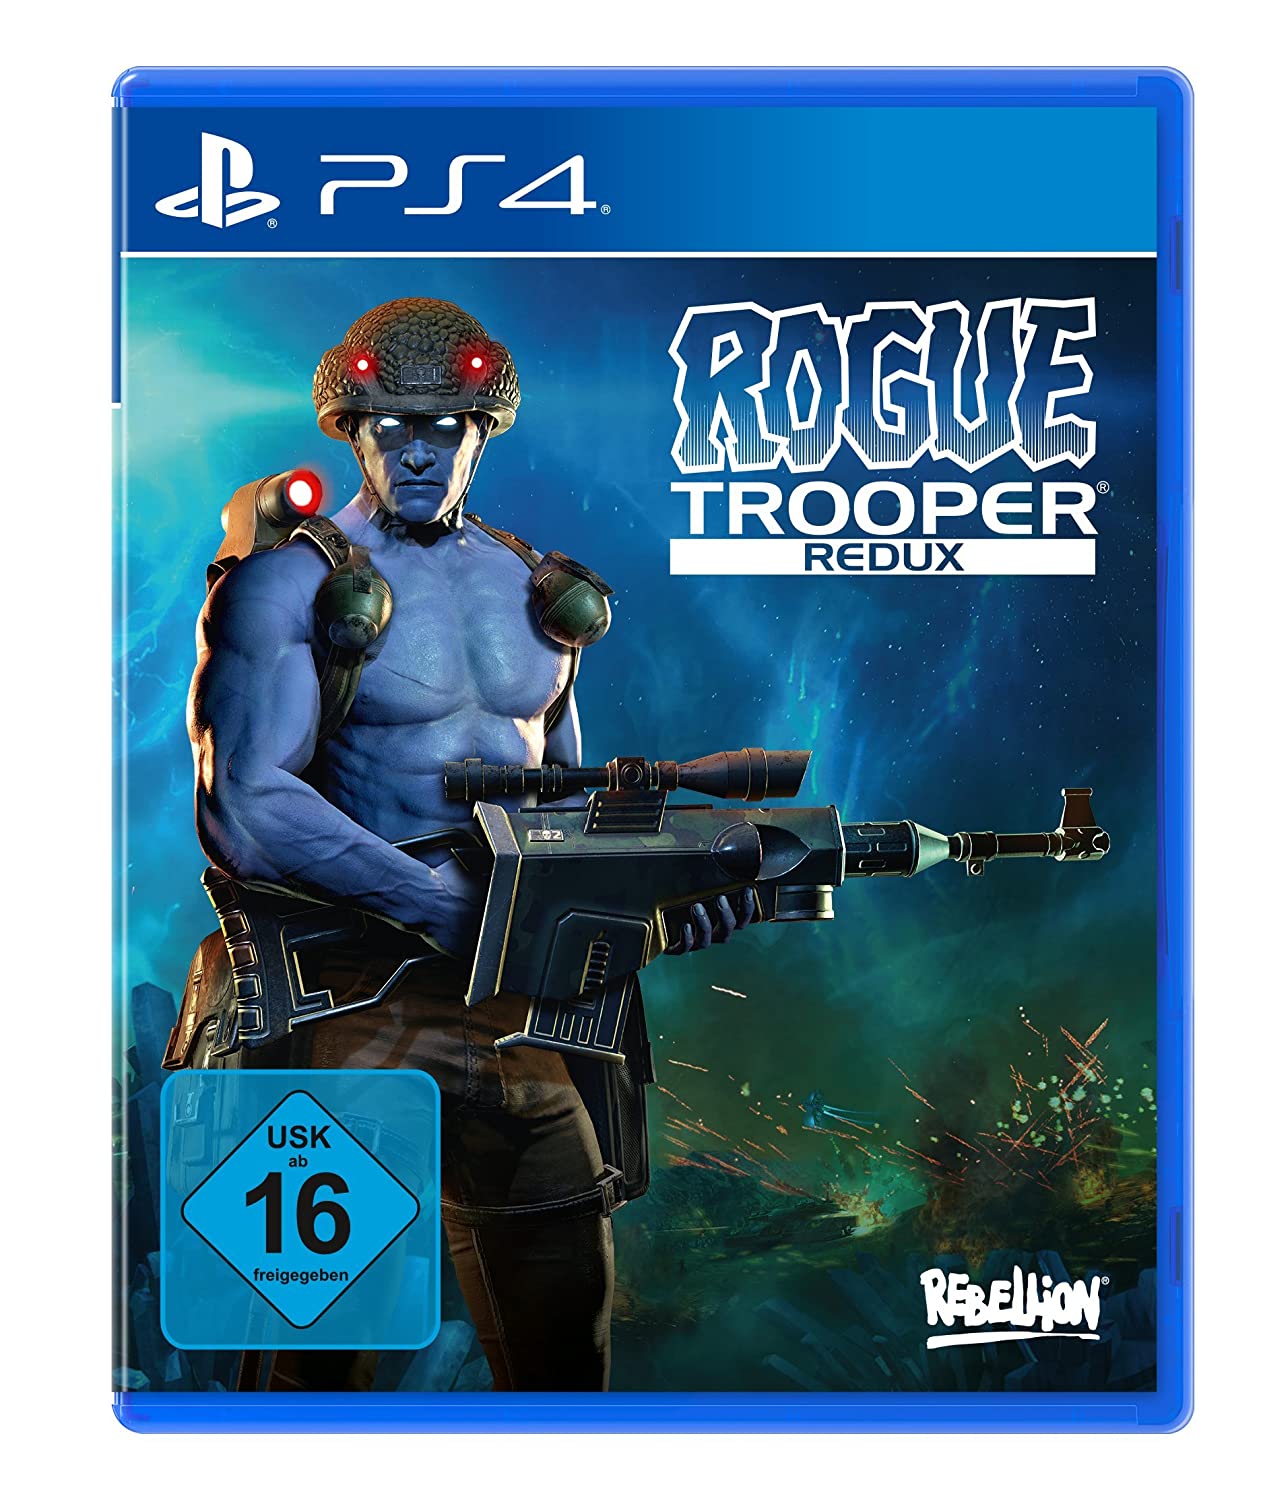 Rogue Trooper. Rouge Troopers Redux. Rogue Trooper Remastered.